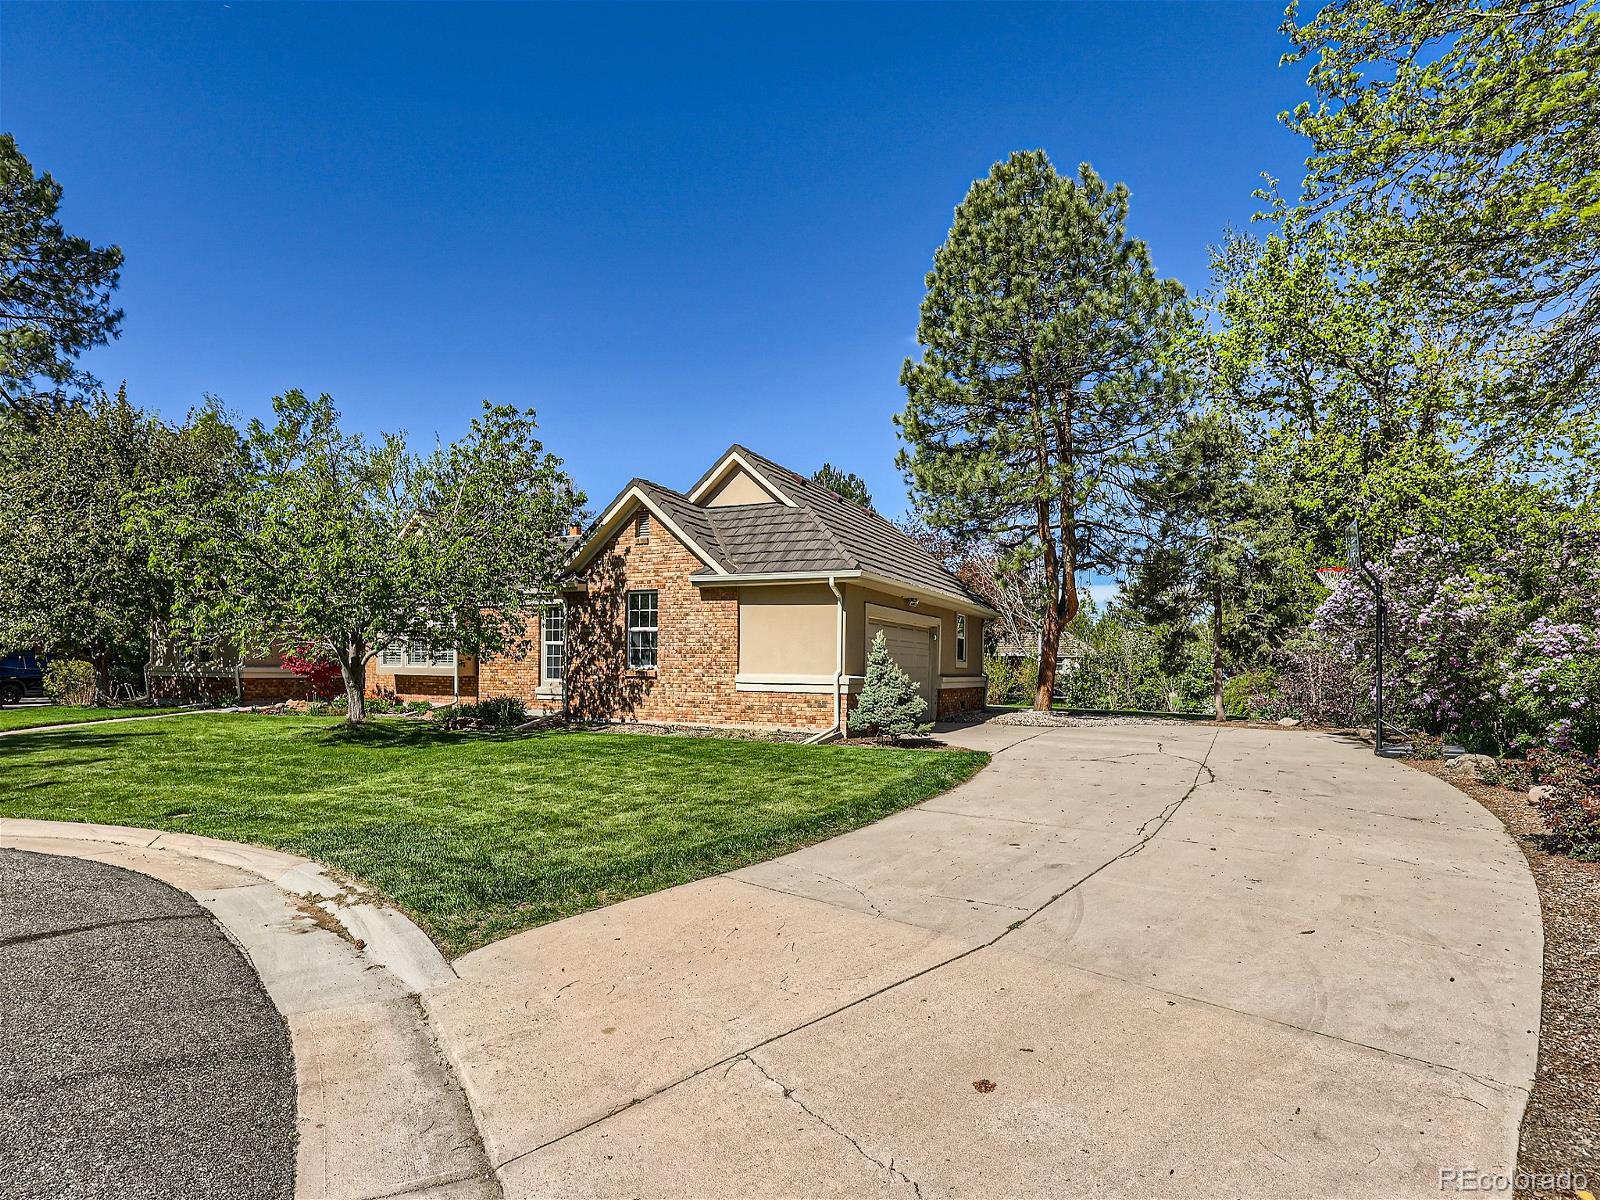 Report Image for 5929 S Wolff Court,Littleton, Colorado